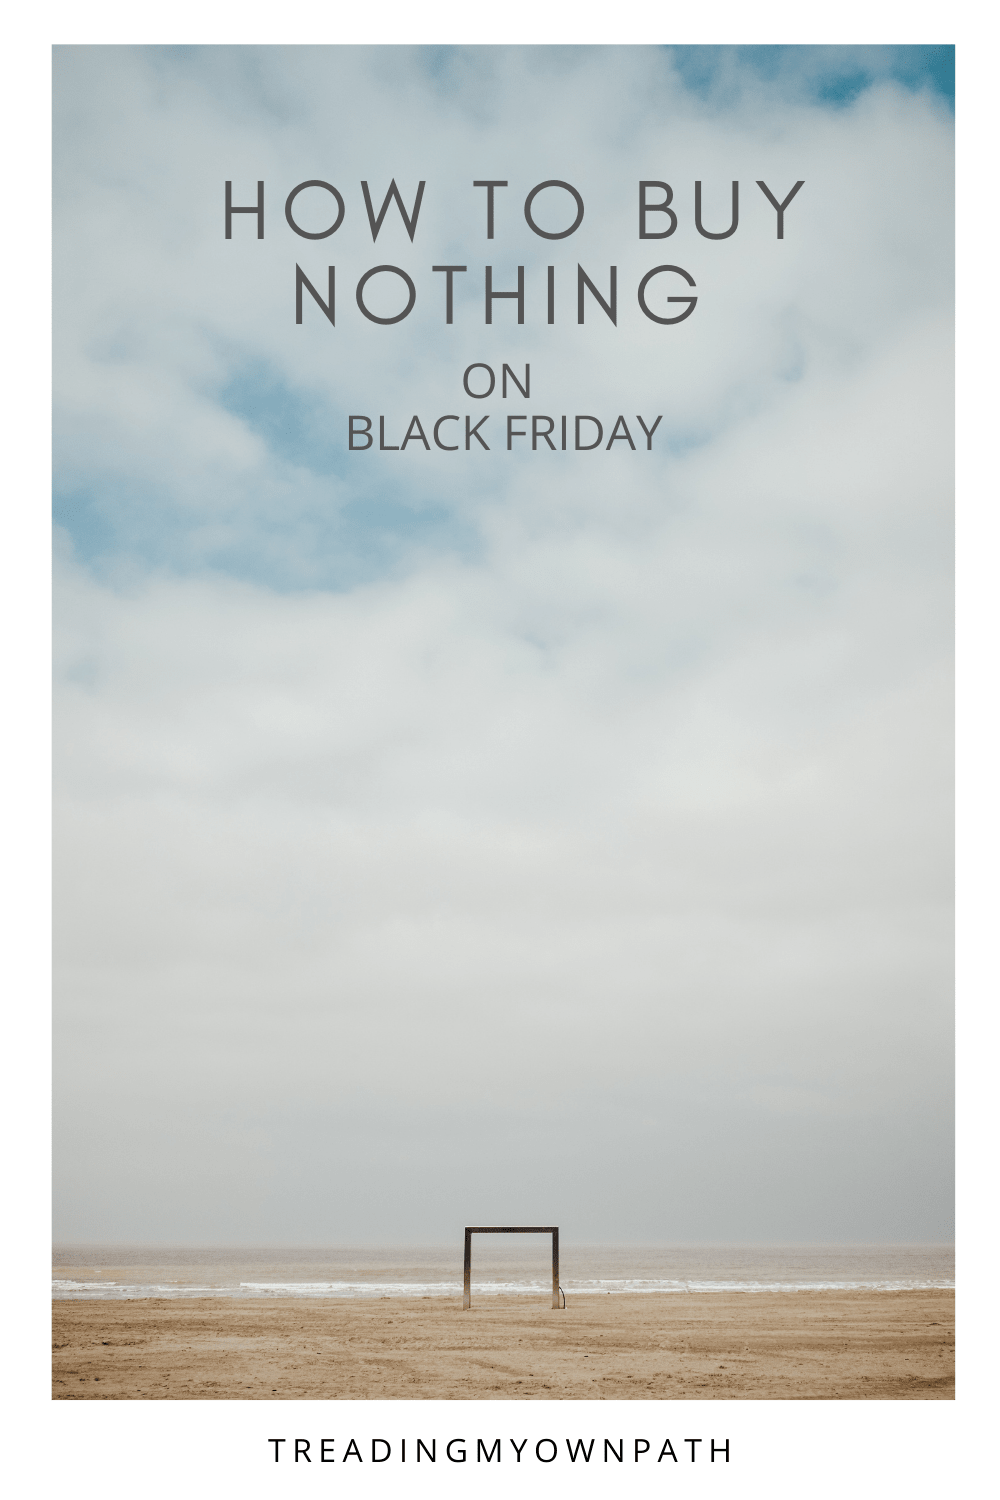 Buy Nothing Day: 5 Things To Do Instead of Shopping